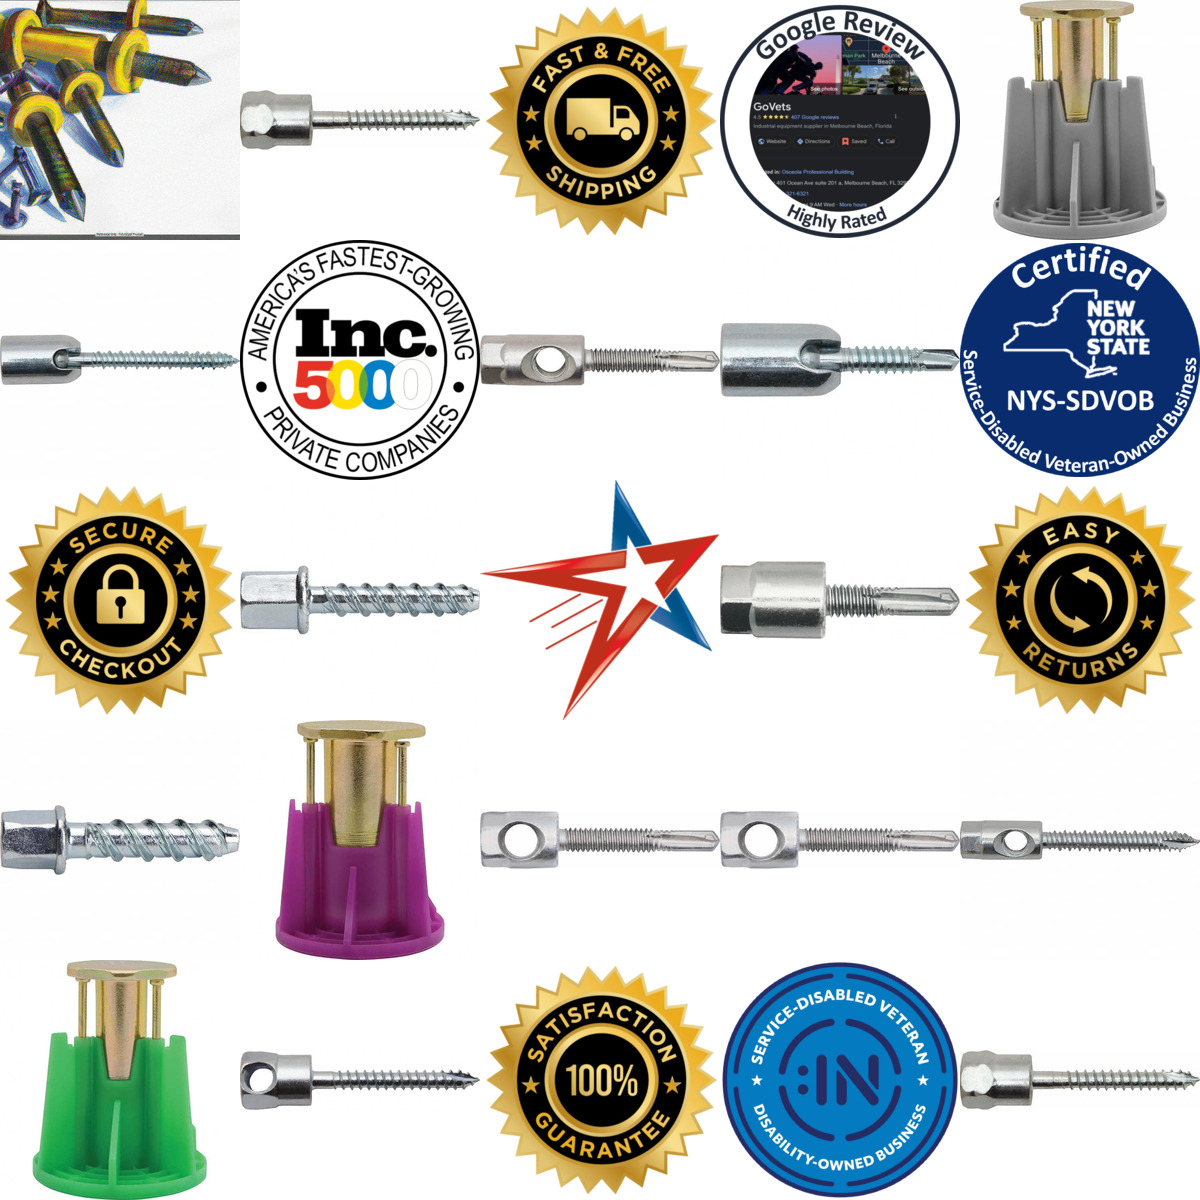 A selection of Dewalt Anchors and Fasteners products on GoVets